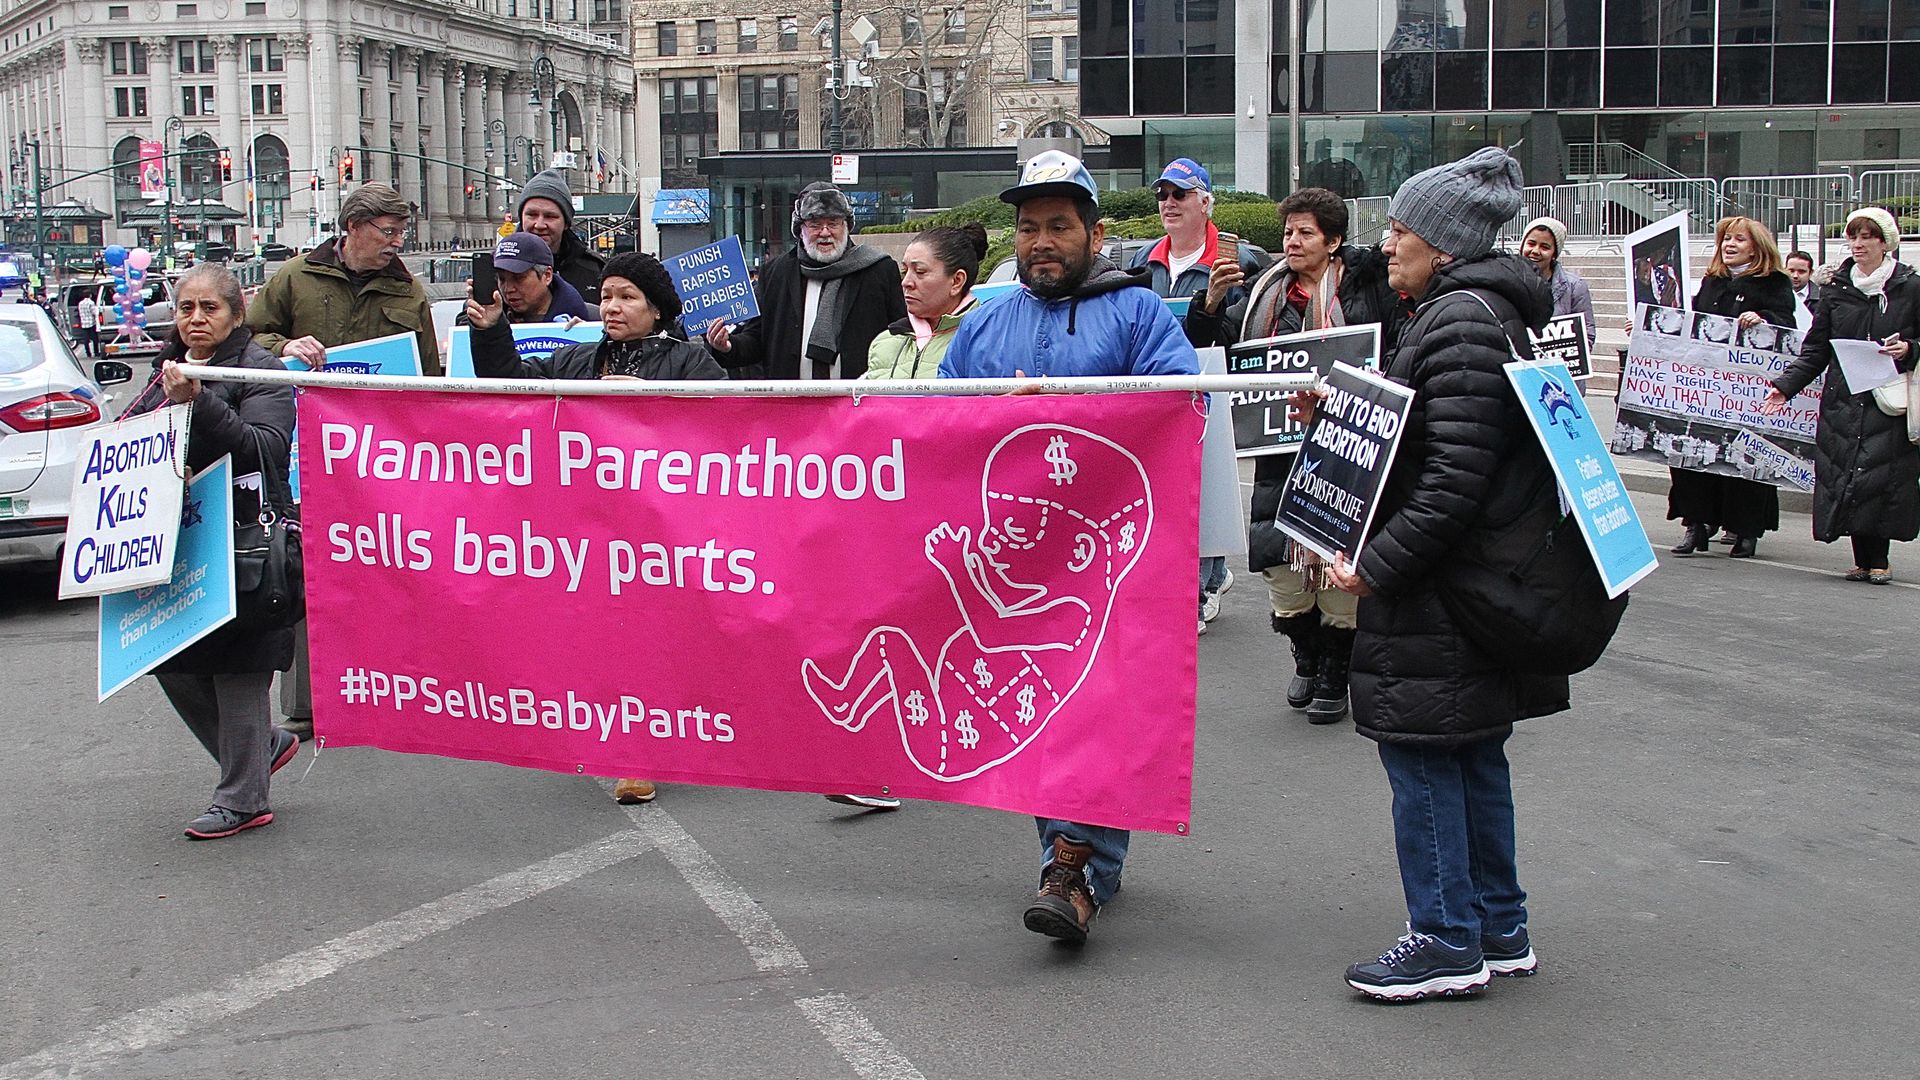 Participants in the International Gift of Life Walk, a pro-Life, anti-abortion event in New York, New York.